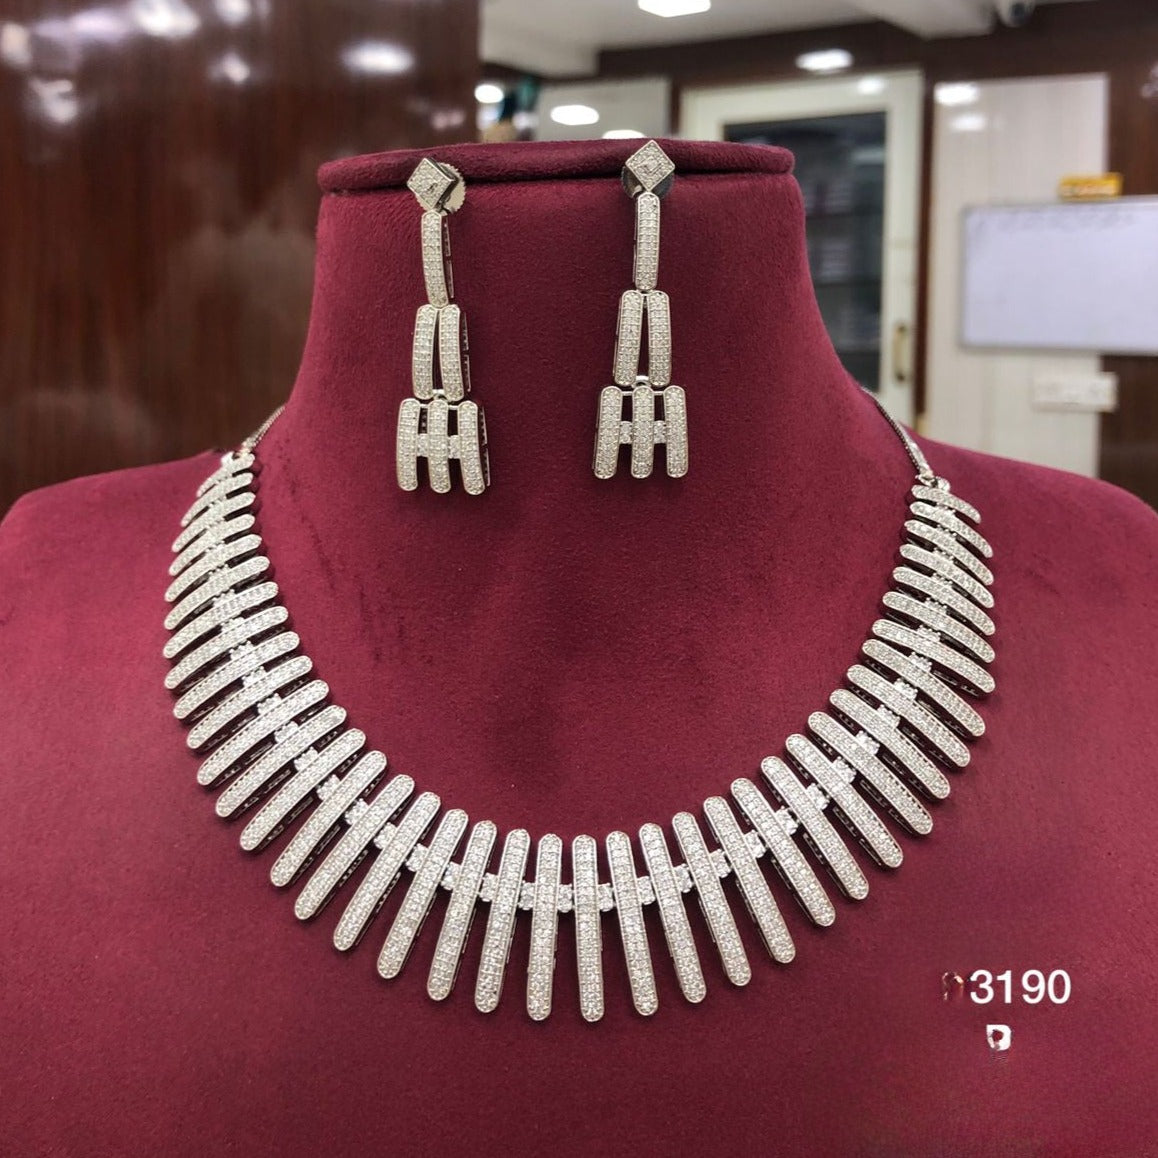 Mesmerizing AD Ensemble: Necklace with Matching Earrings